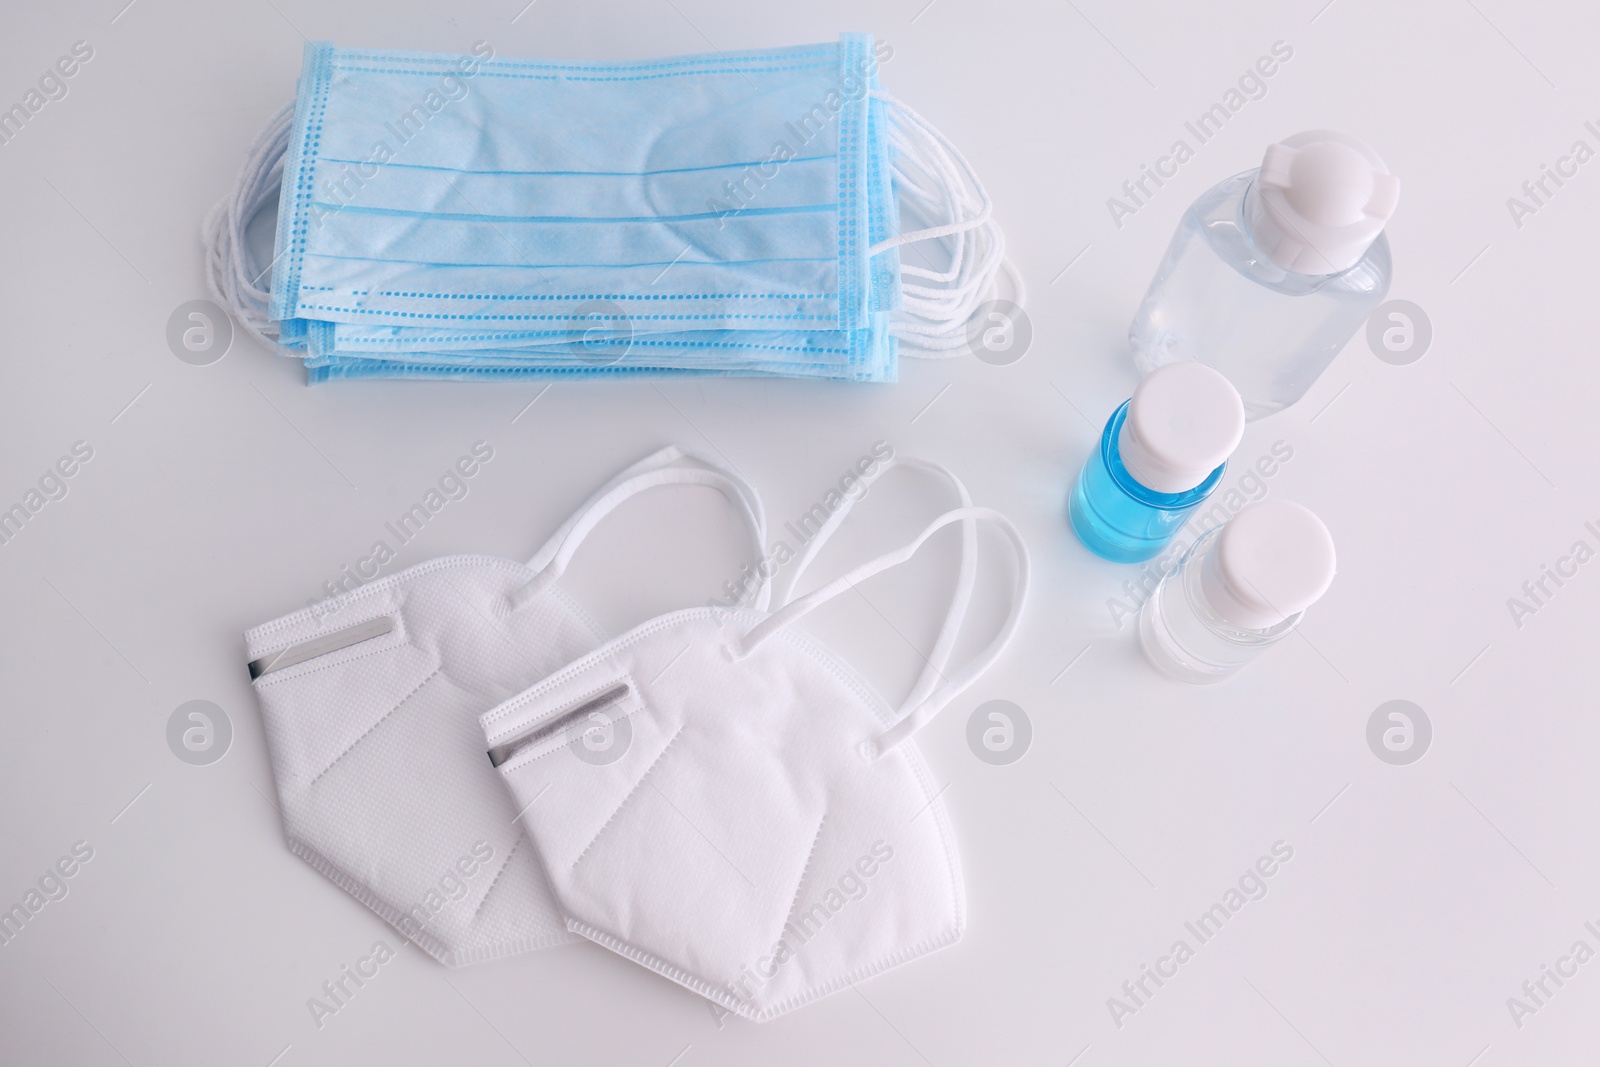 Photo of Hand sanitizers and respiratory masks on white background, flat lay. Protective essentials during COVID-19 pandemic